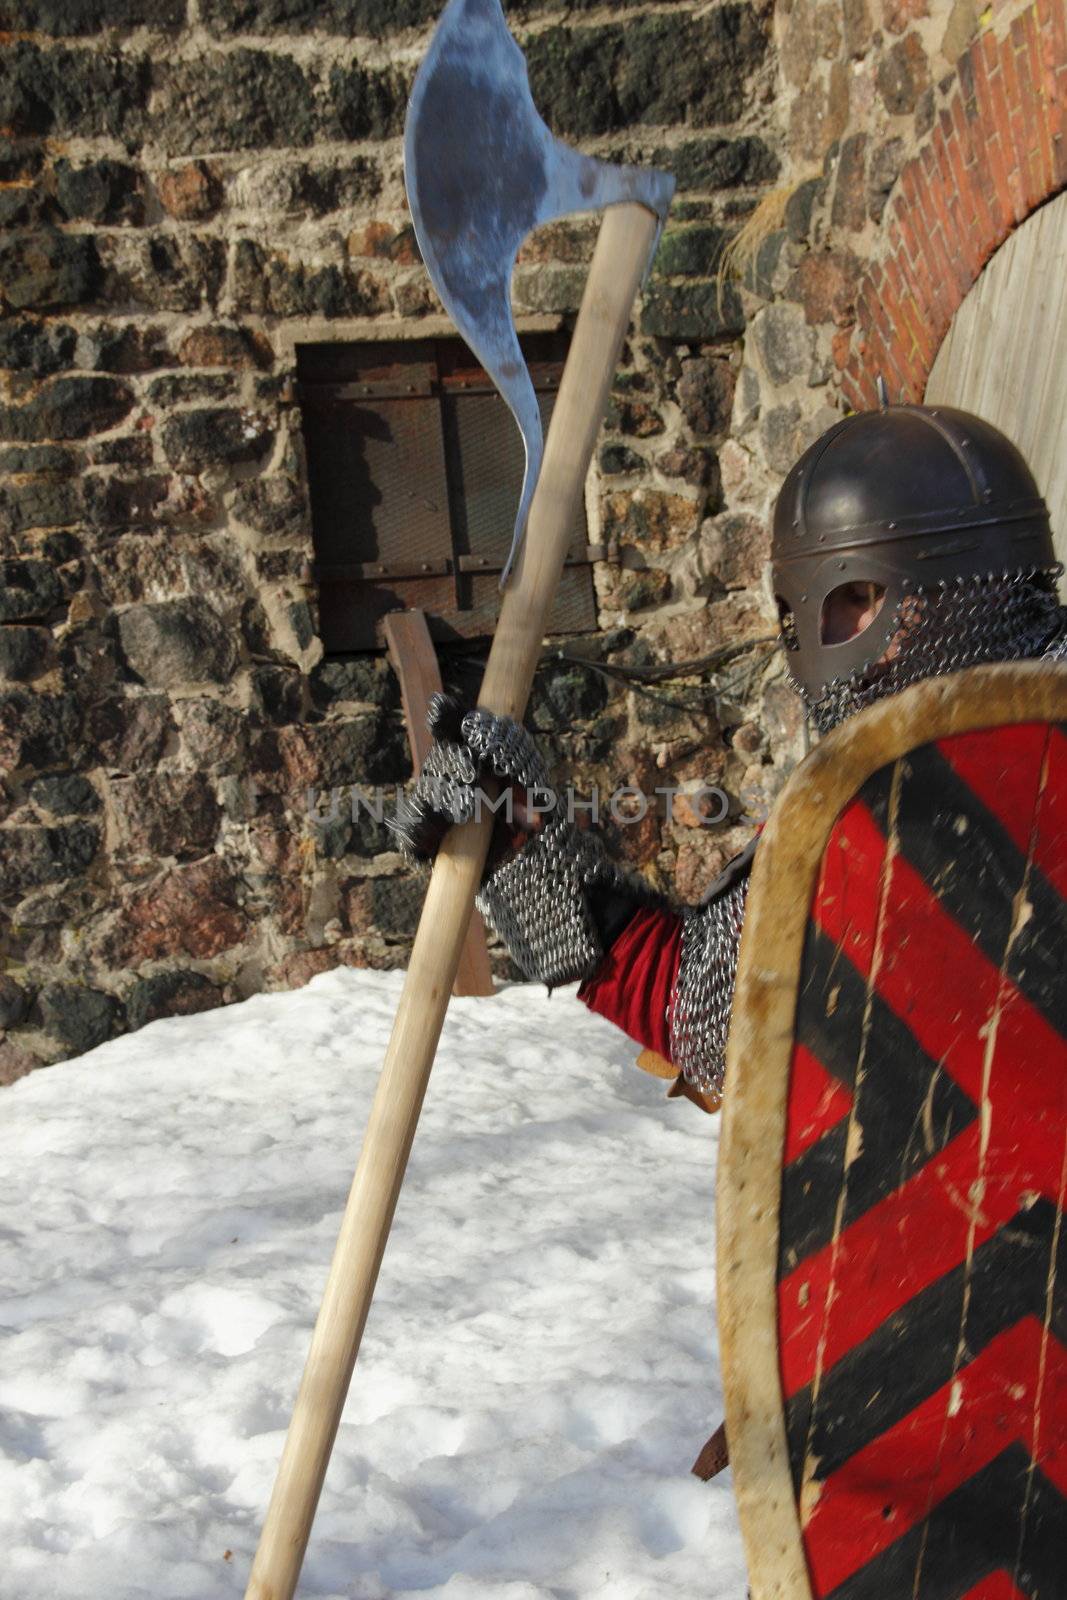 warlike knight in armor against the fortress wall